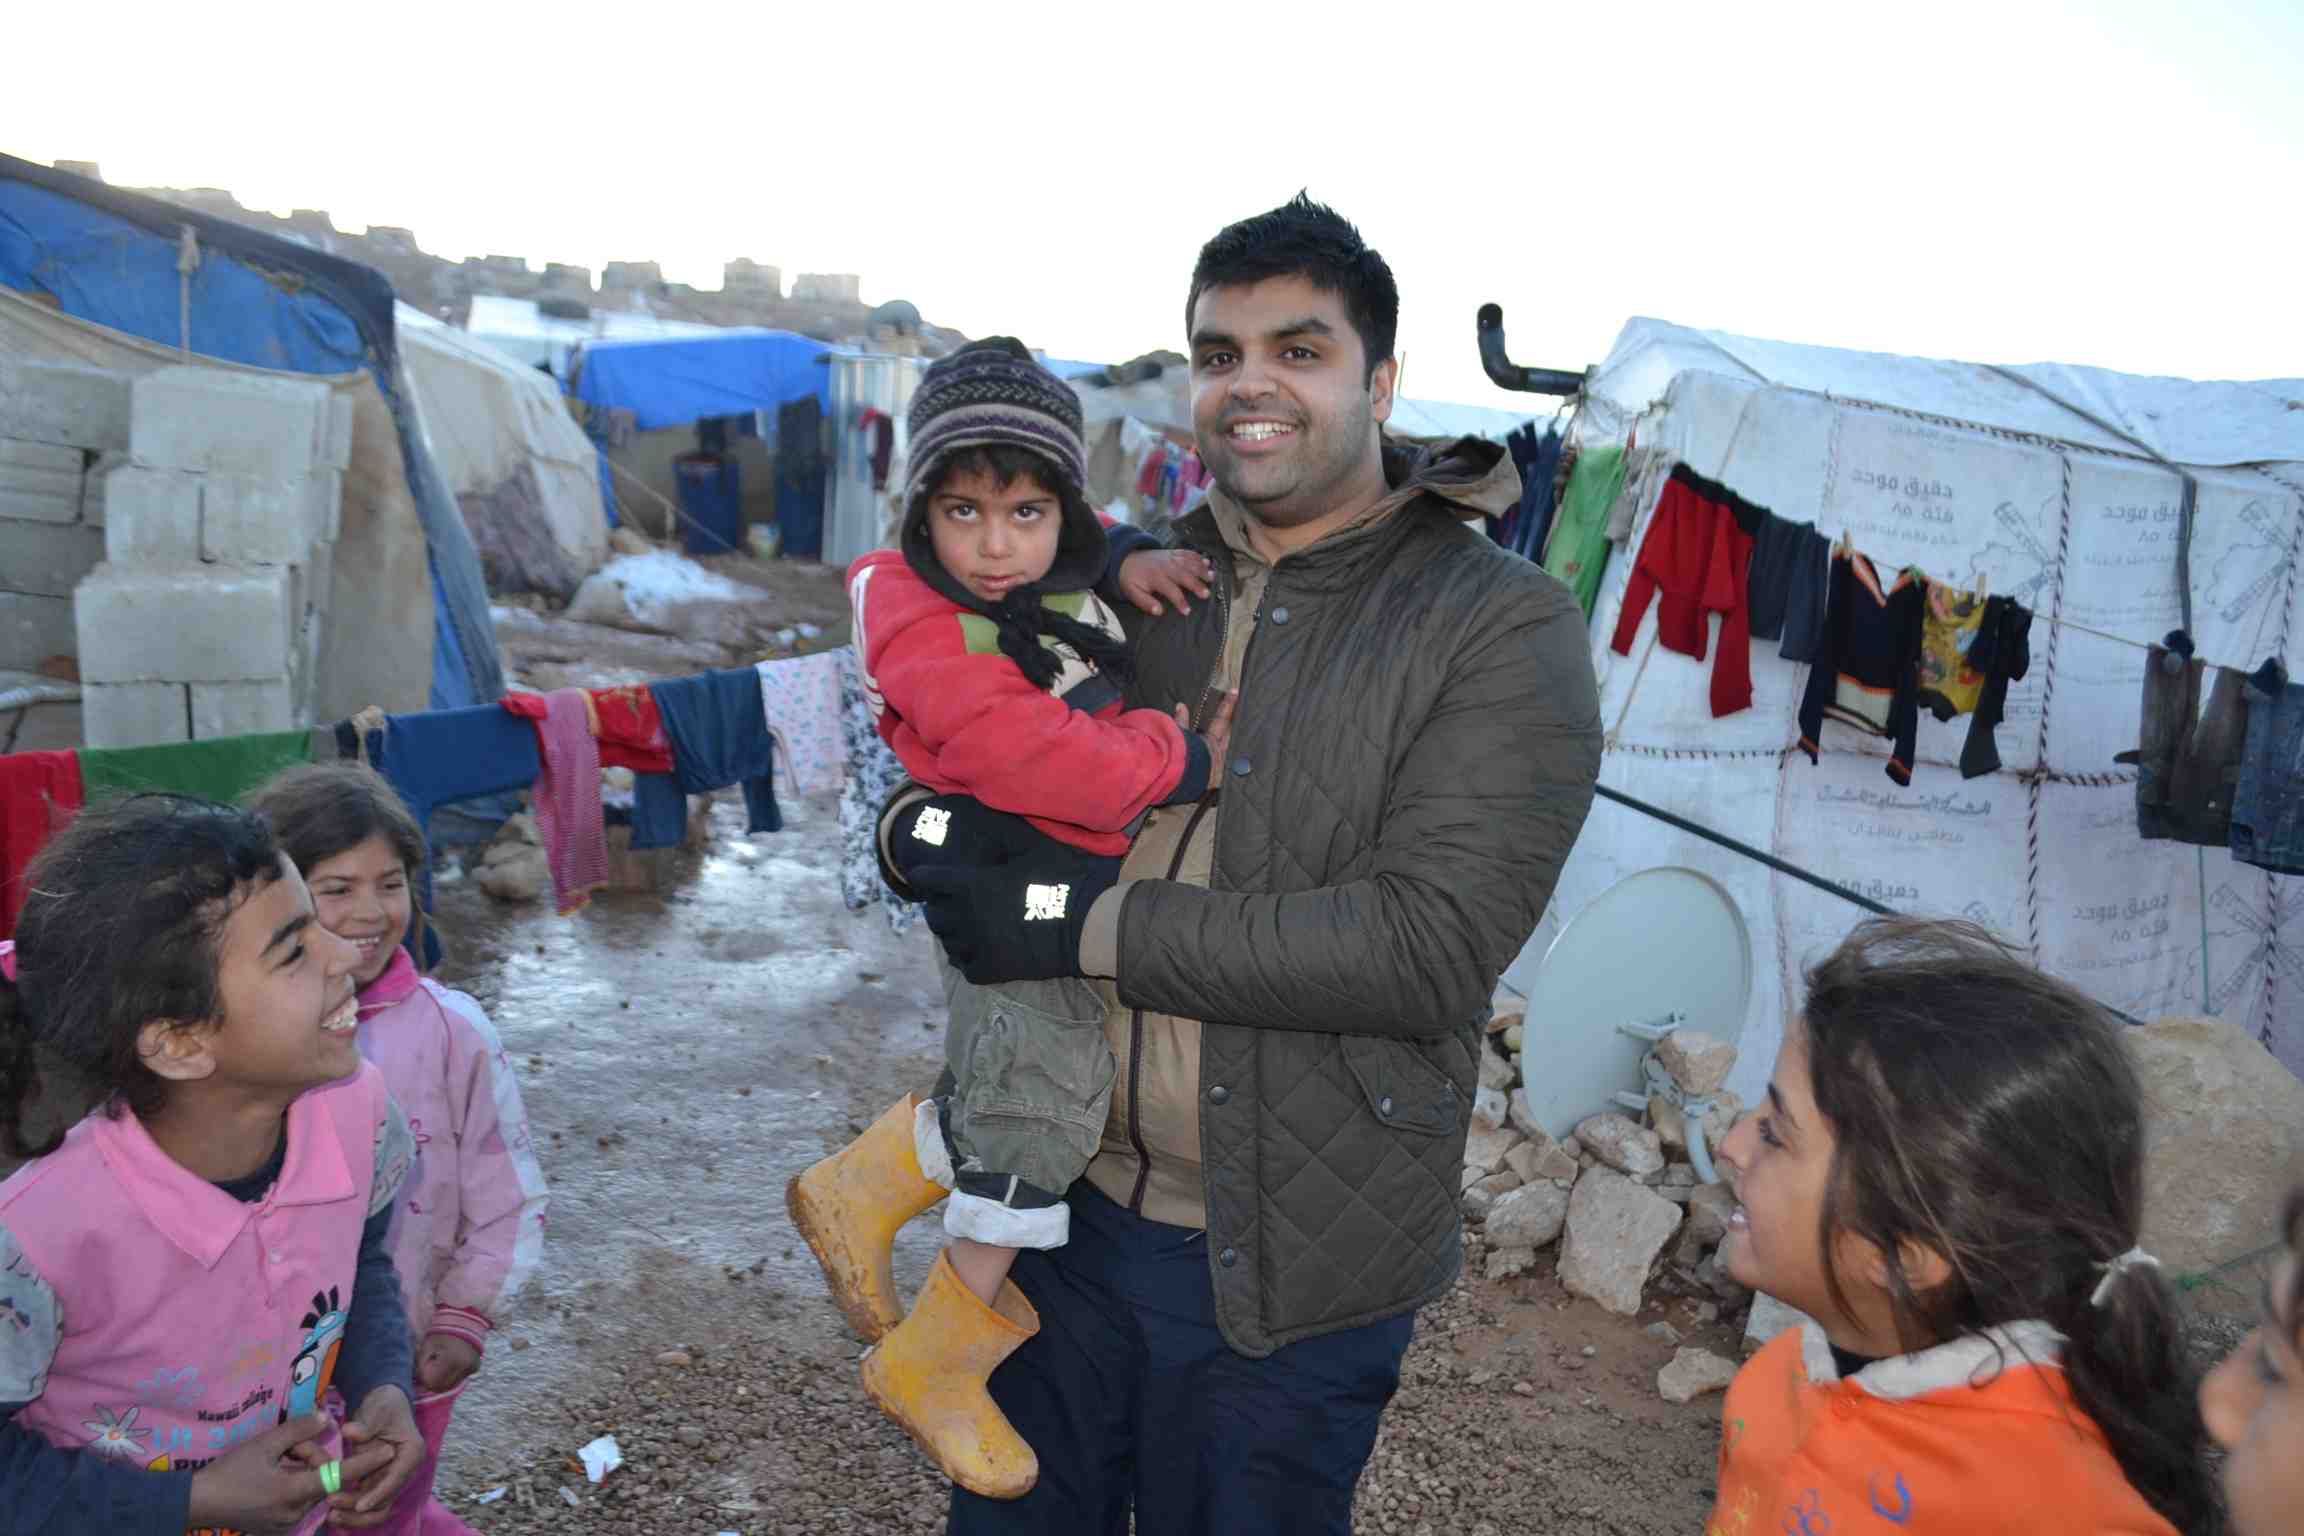 Syrian Refugee Camps Winter Relief